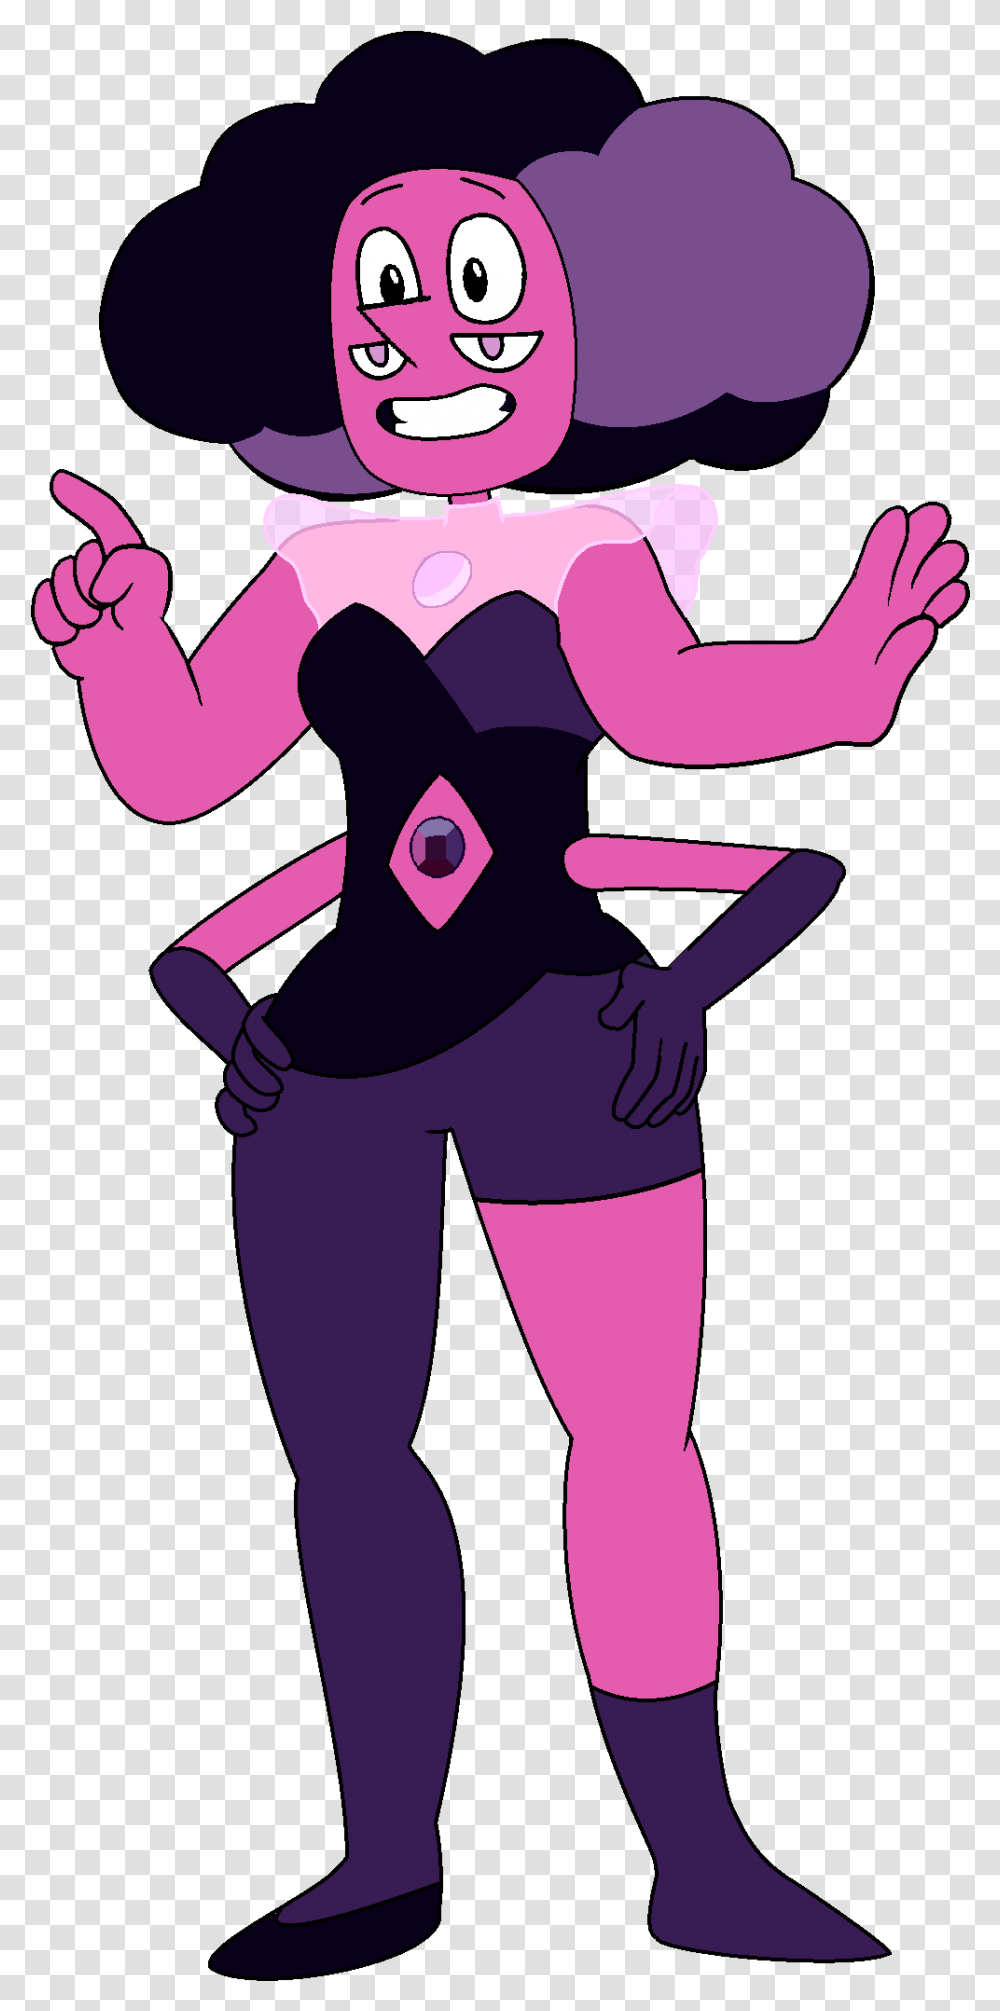 Lars Of The Stars Wiki Off Colors Steven Universe, Person, Sleeve, Pants Transparent Png